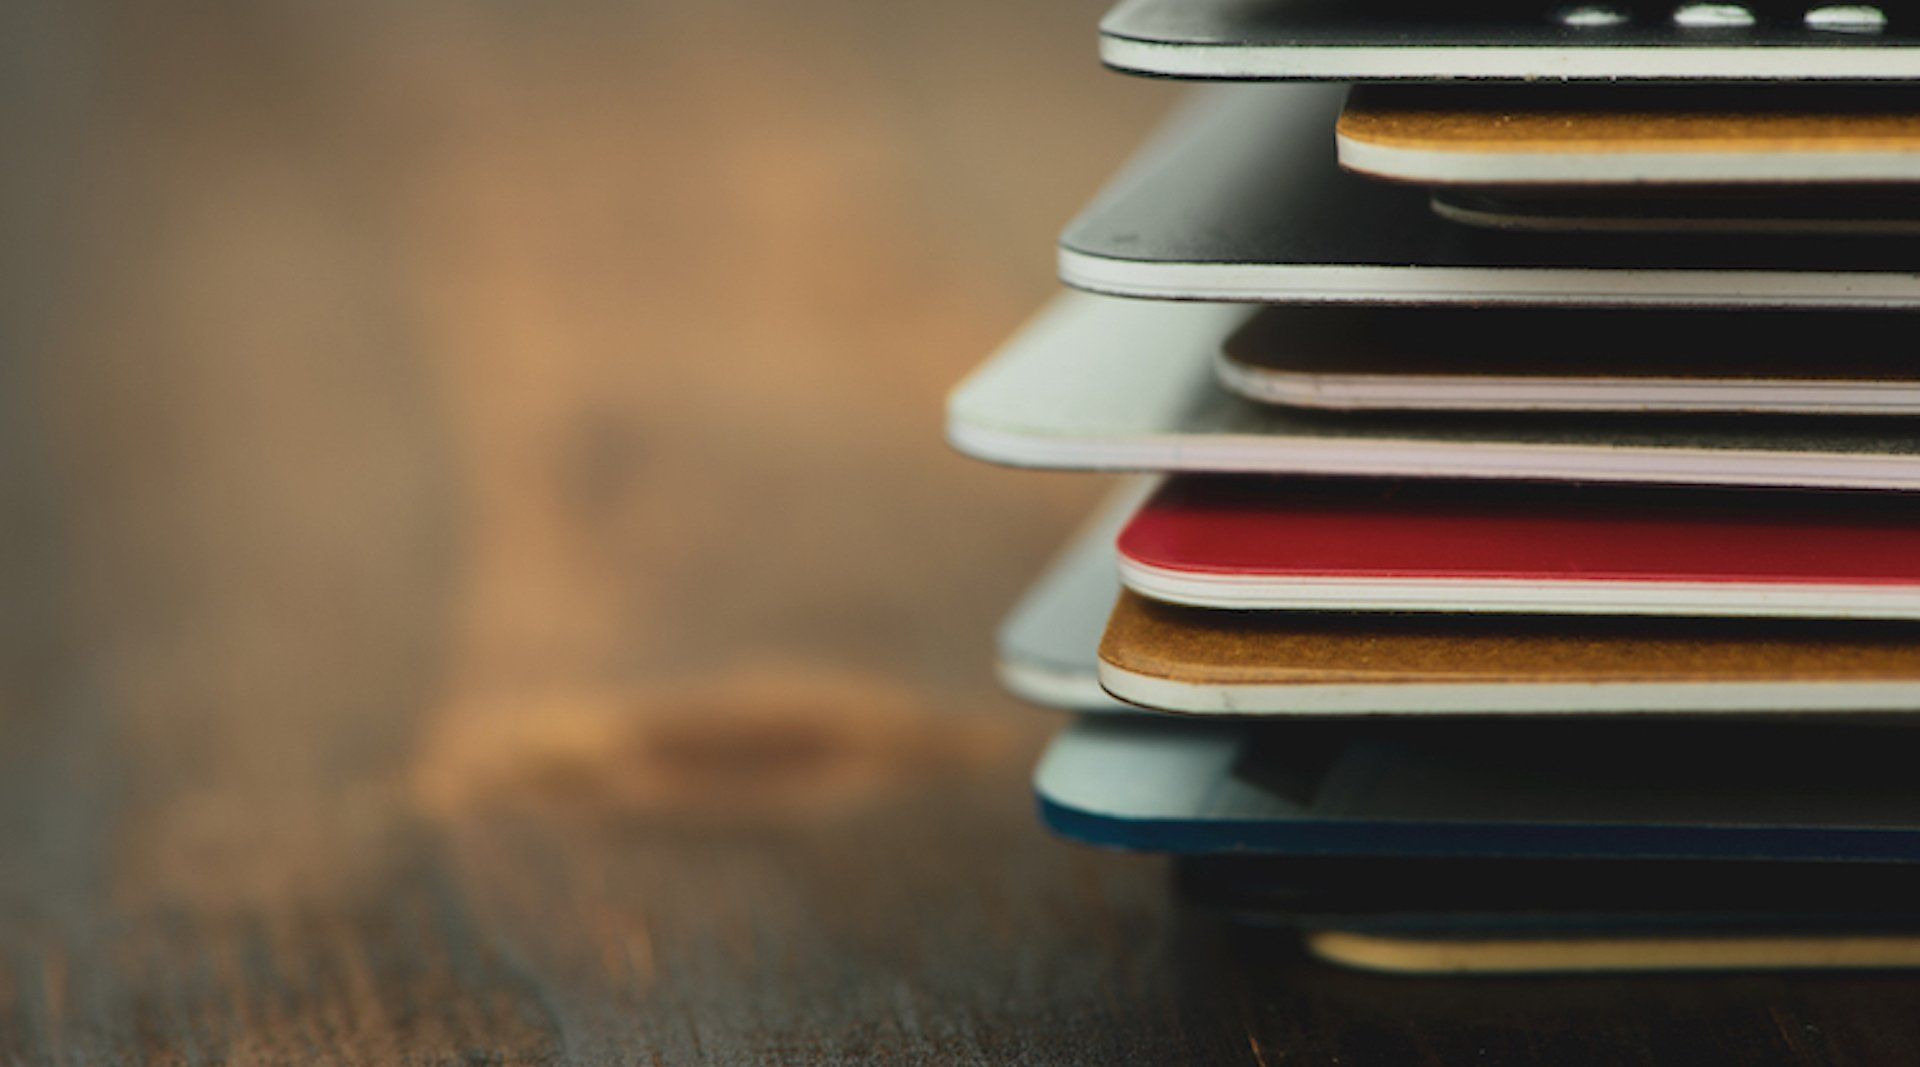 A stack of credit cards on a wooden table.